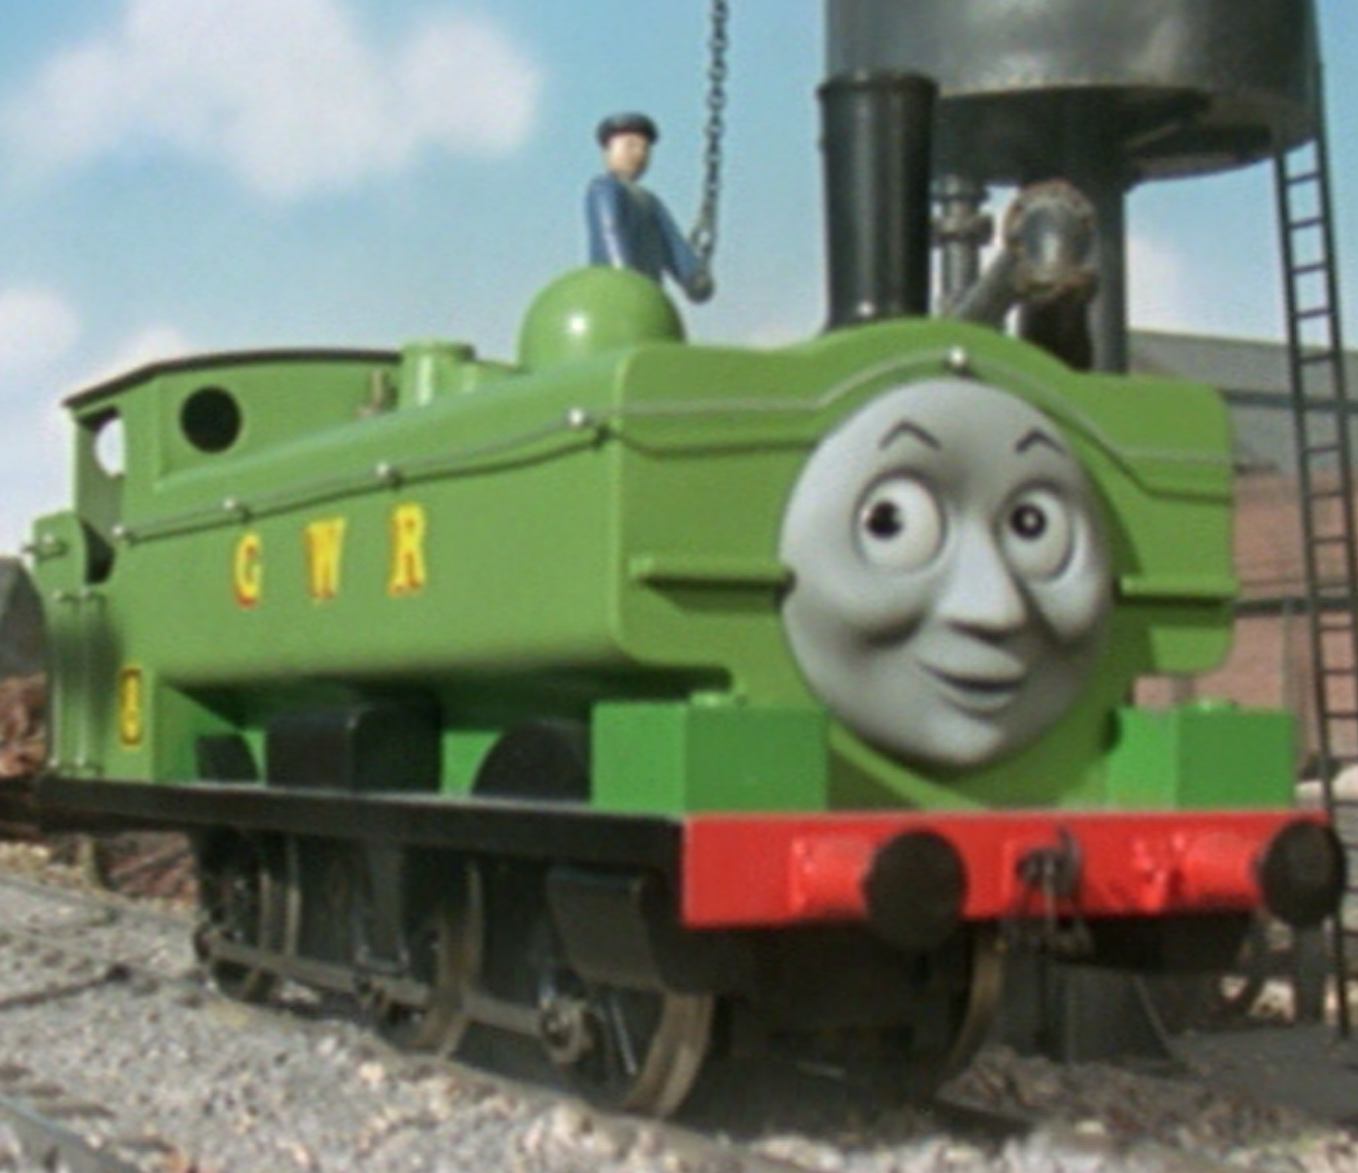 Duck (T&F)/Behind the Scenes, Thomas the Tank Engine Wikia